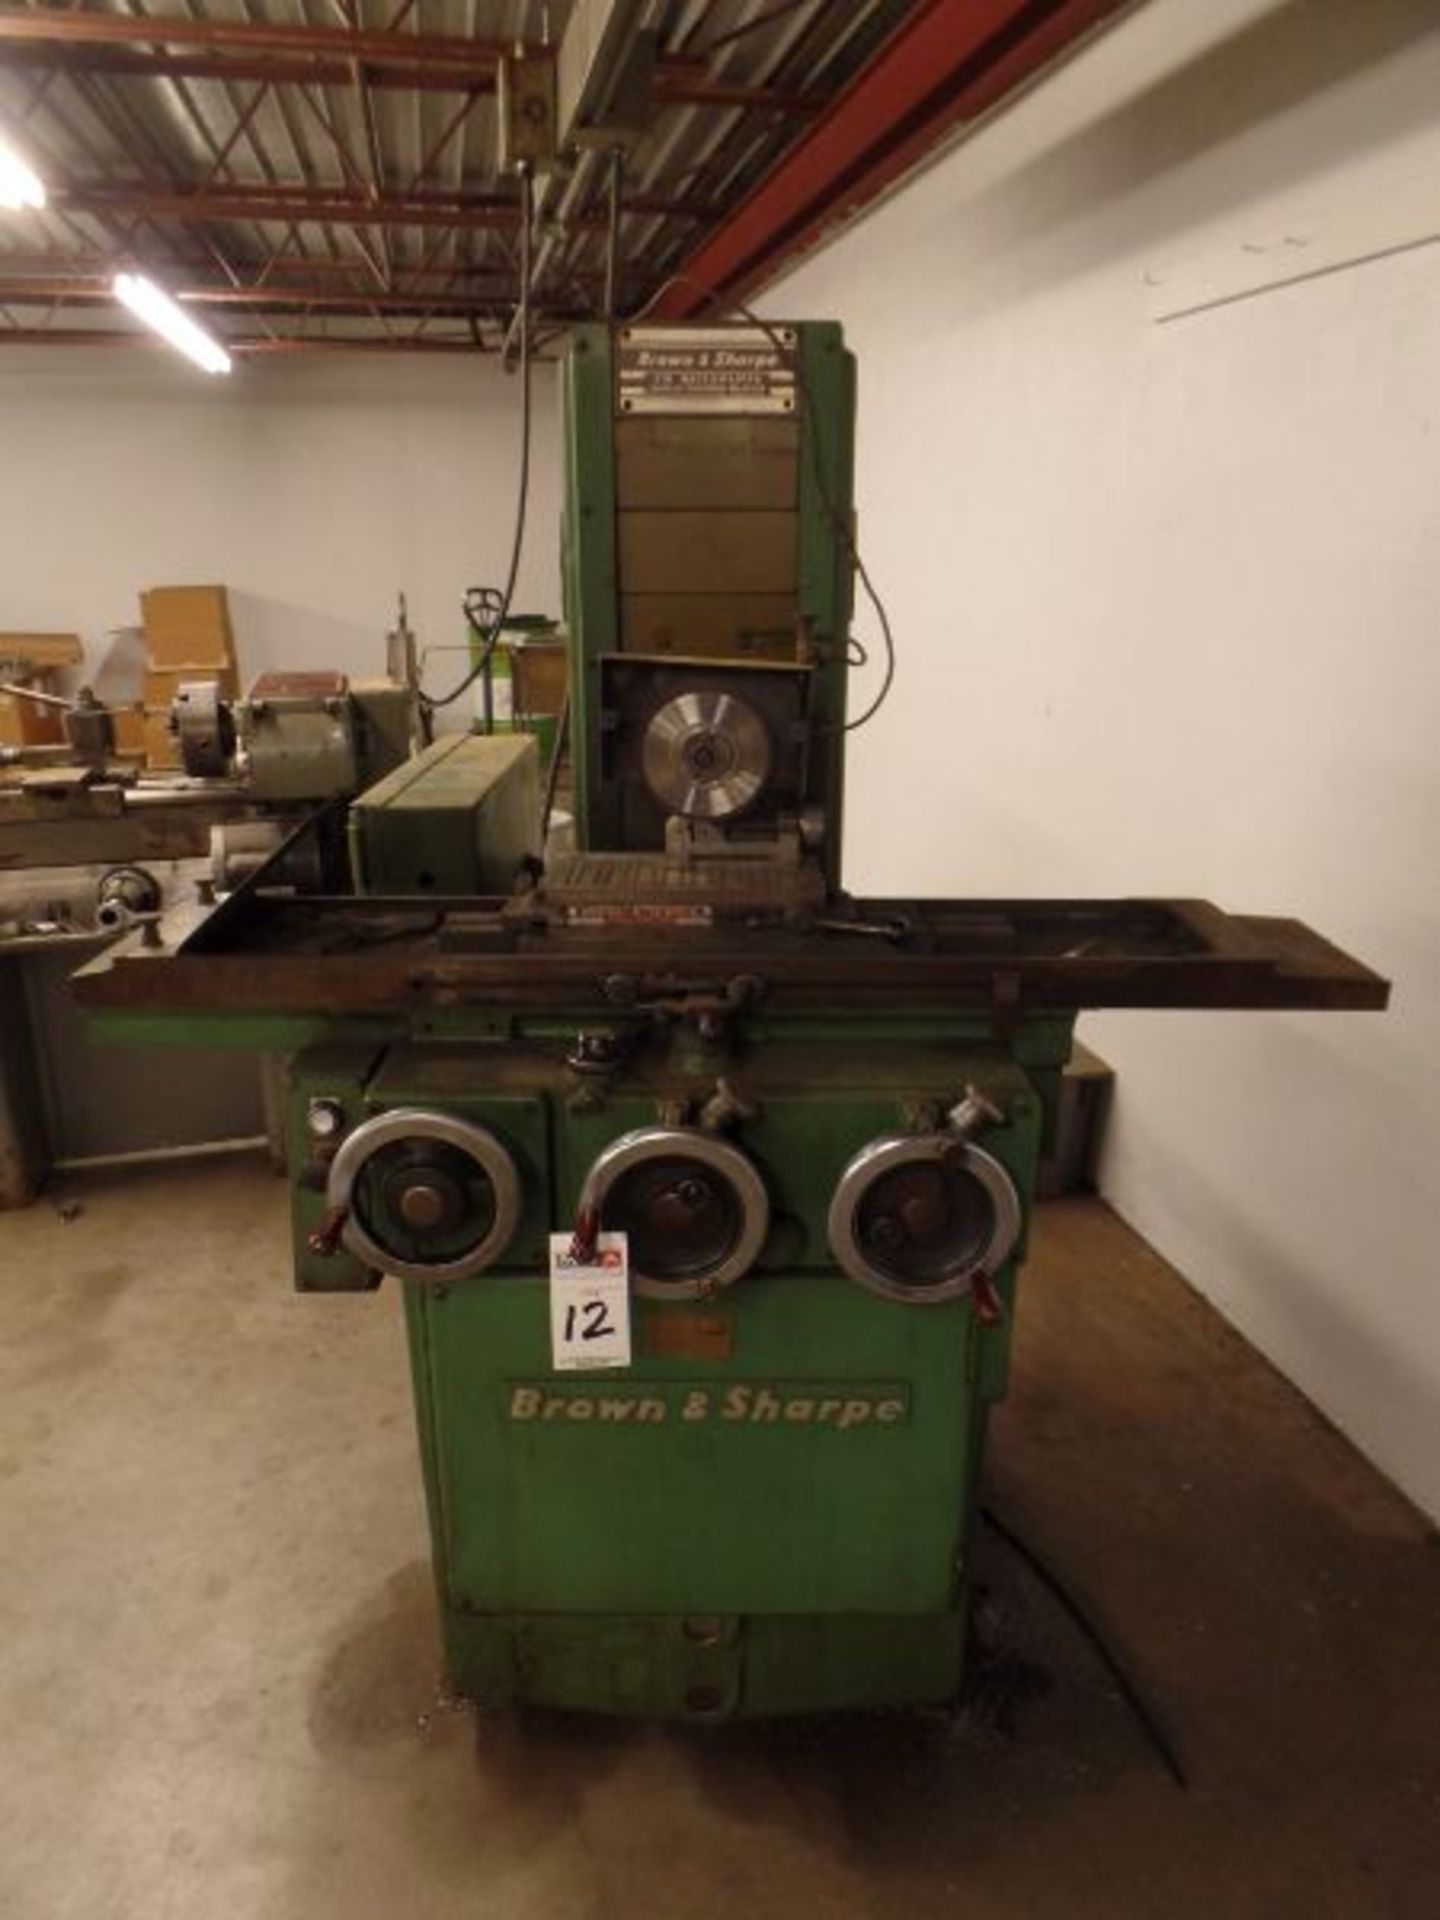 Brown & Sharpe 618 Micromaster Hyd. Surface Grinder, 6"x18" Magnetic Chuck, S/N 523-6181-797